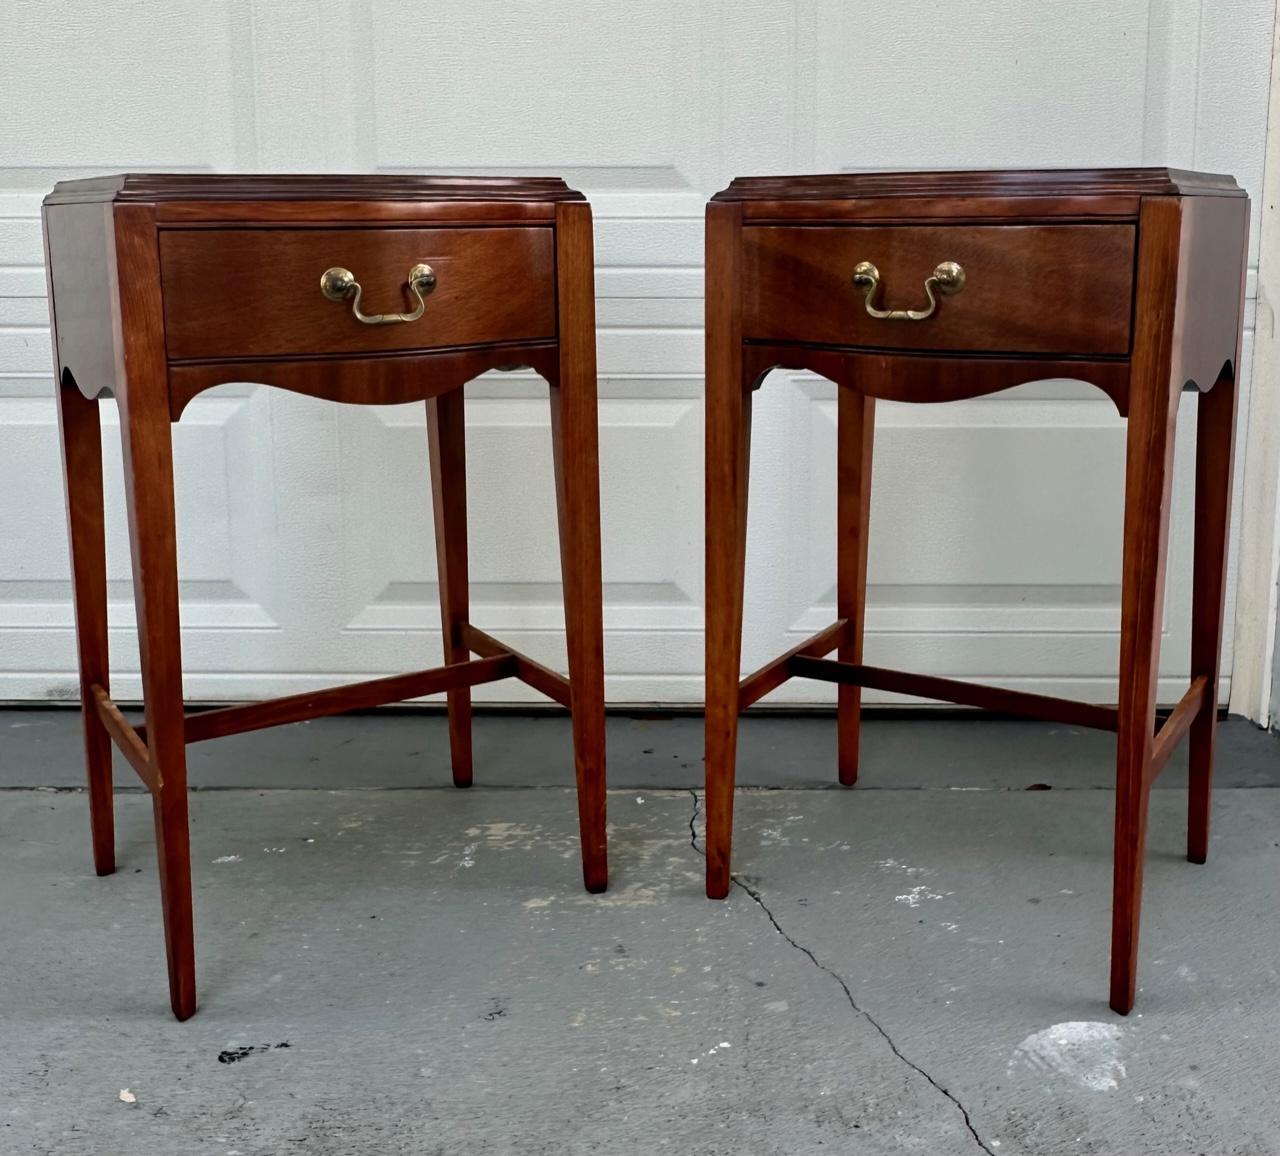 Pair 19th Century Louis XVI Style Mahogany Serpentine Nightstands.

These beautiful. petite 19th century mahogany nightstands have a serpentine top and a curved apron on front and sides.  One drawer opens with bronze handled hardware.  The bedside